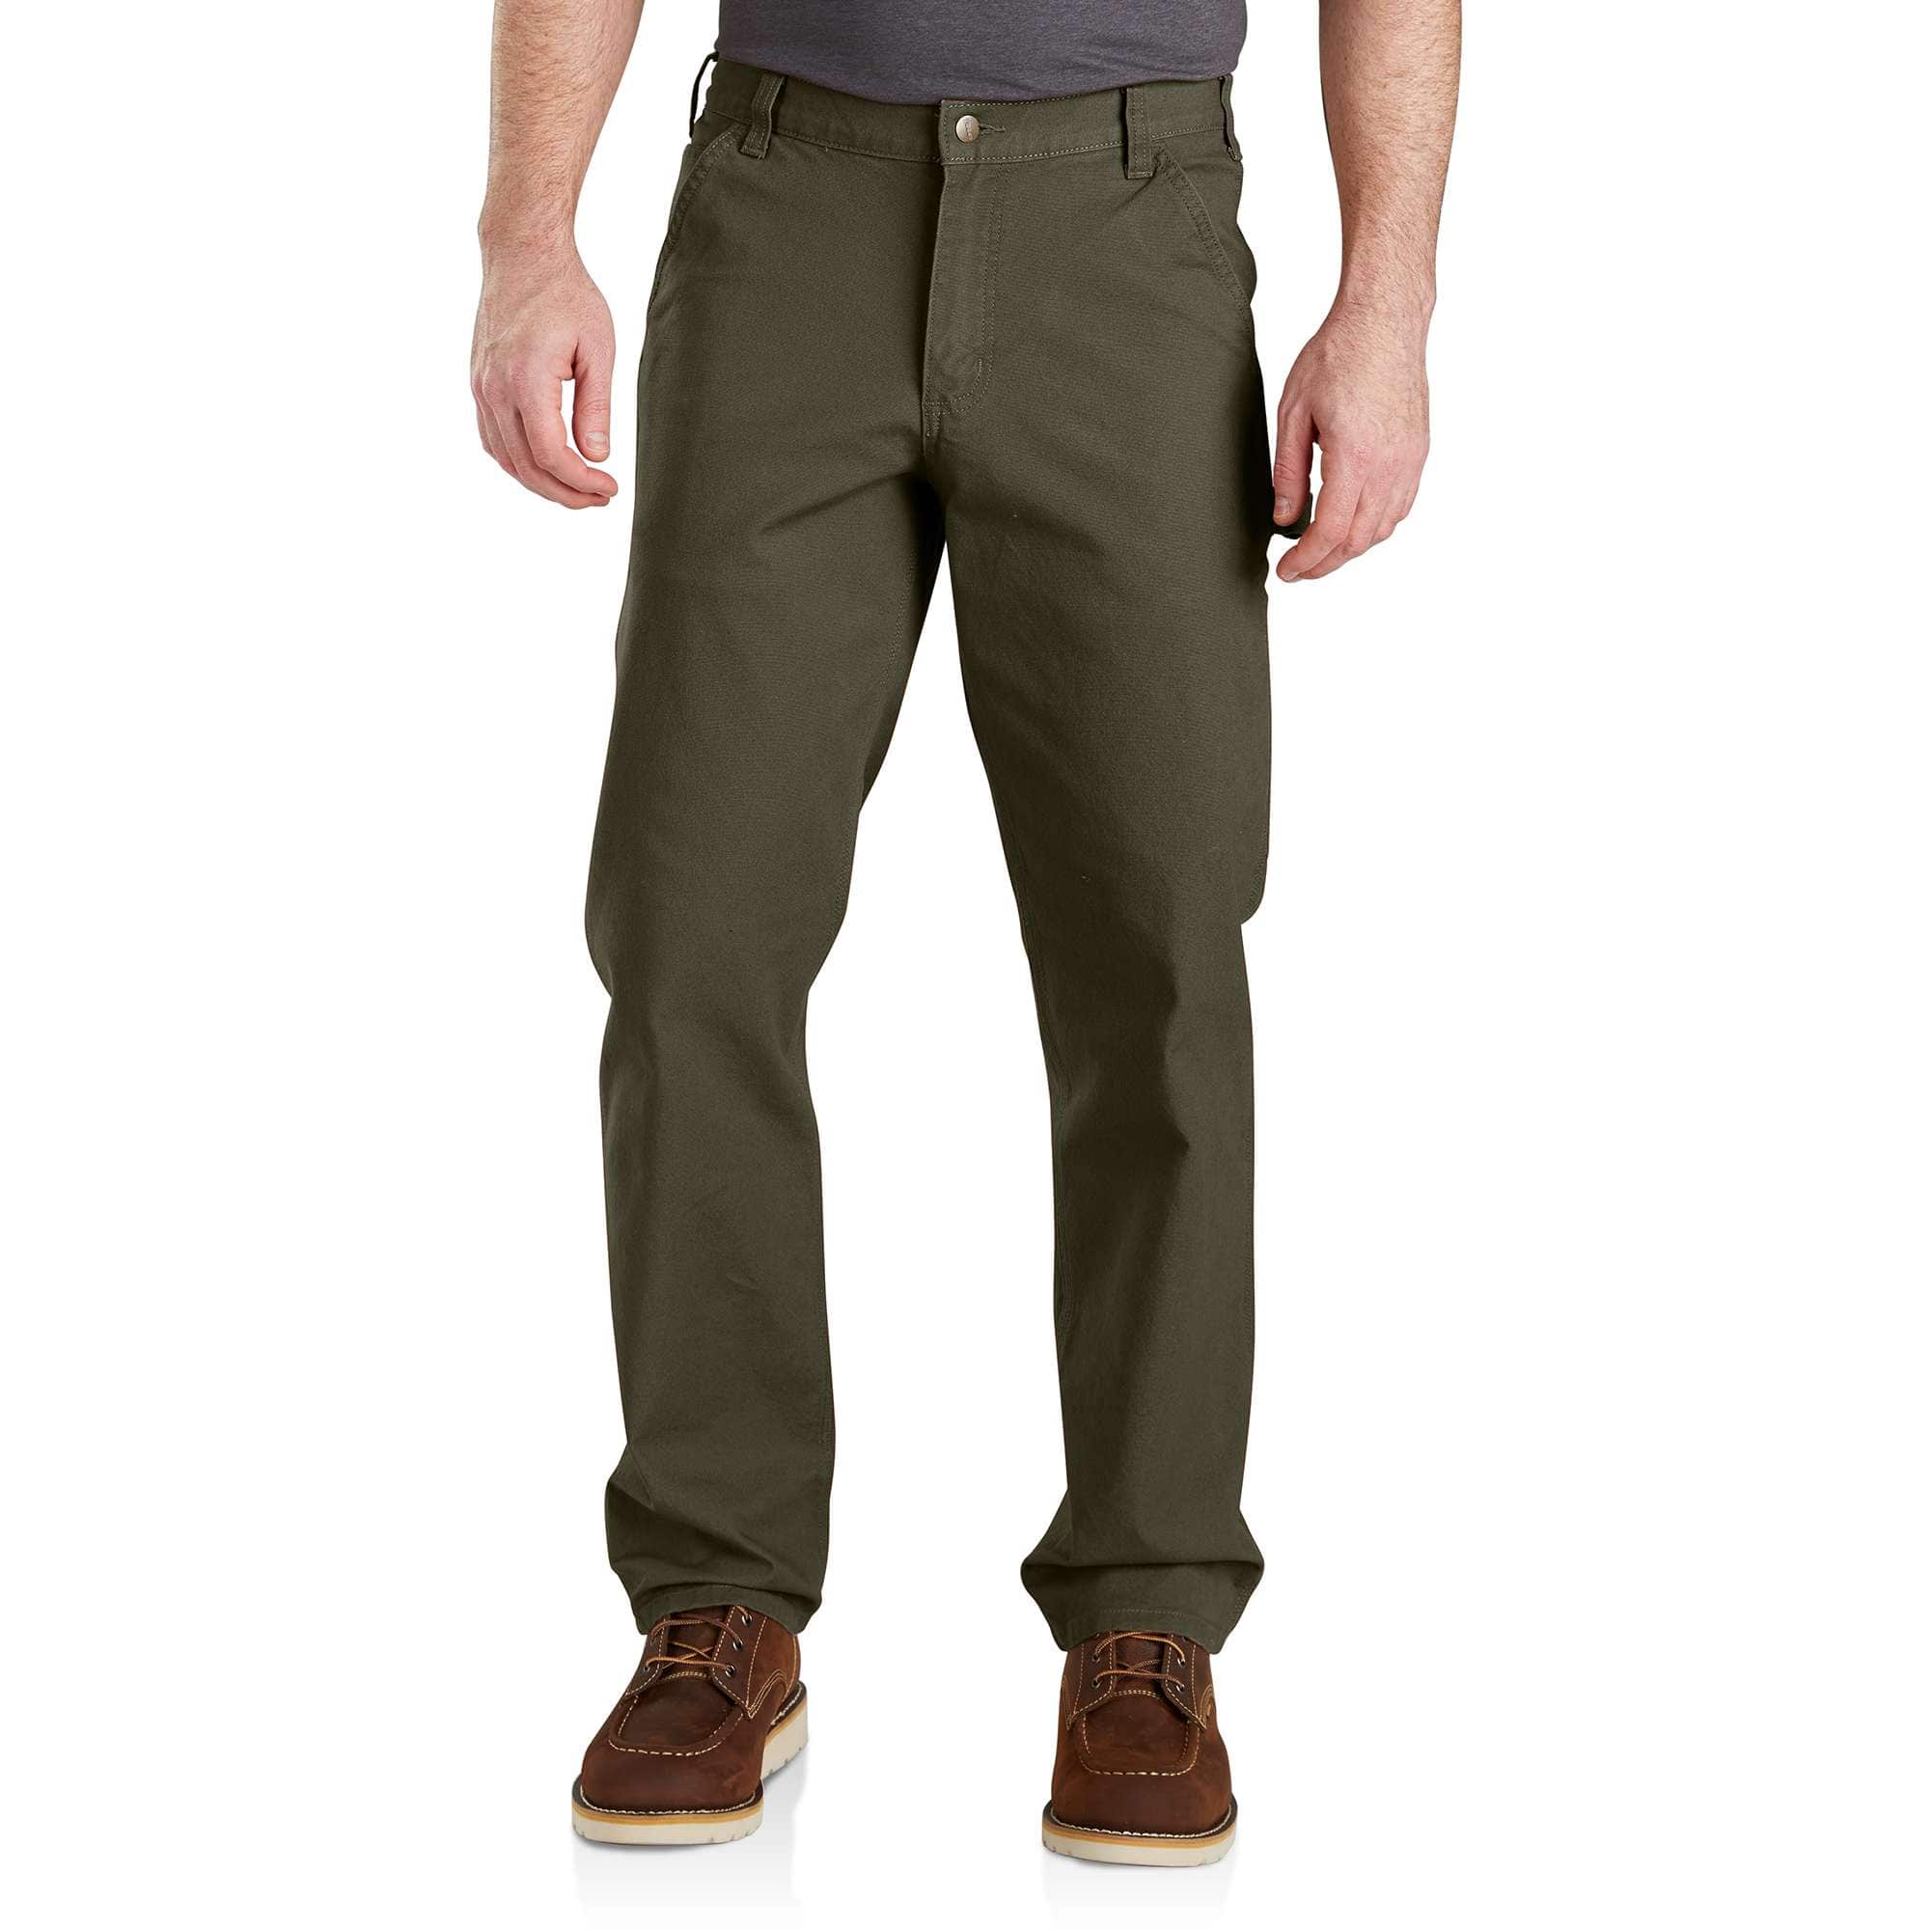 Carhartt Men's 29 in. x 30 in. Hickory Cotton/Spandex Rf Relaxed